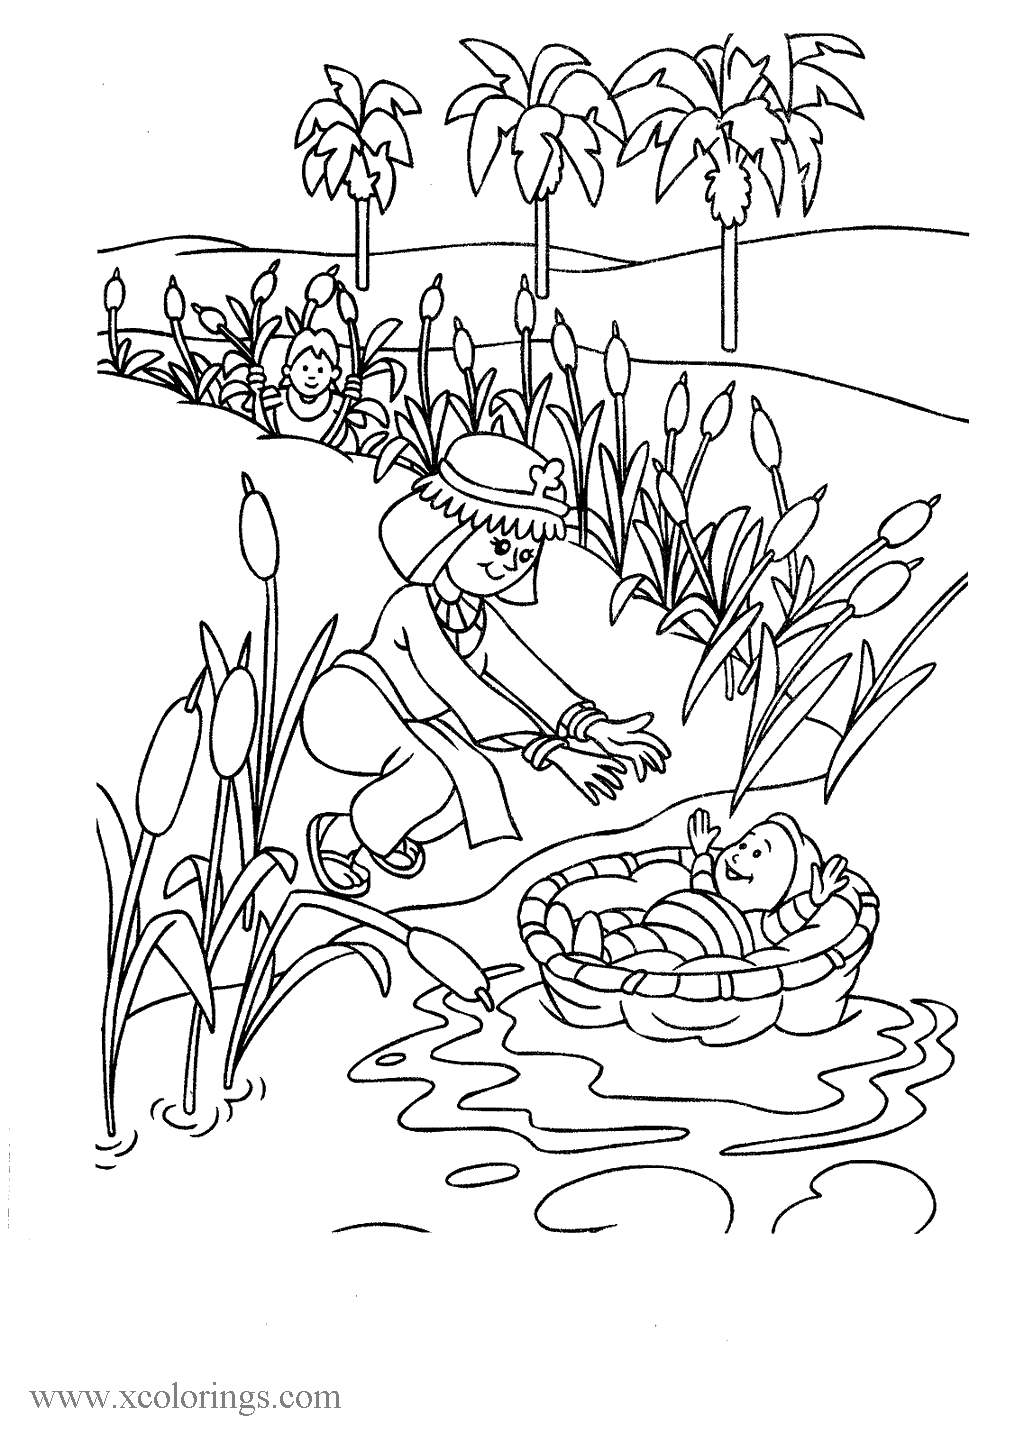 Free Passover Moses Coloring Pages printable